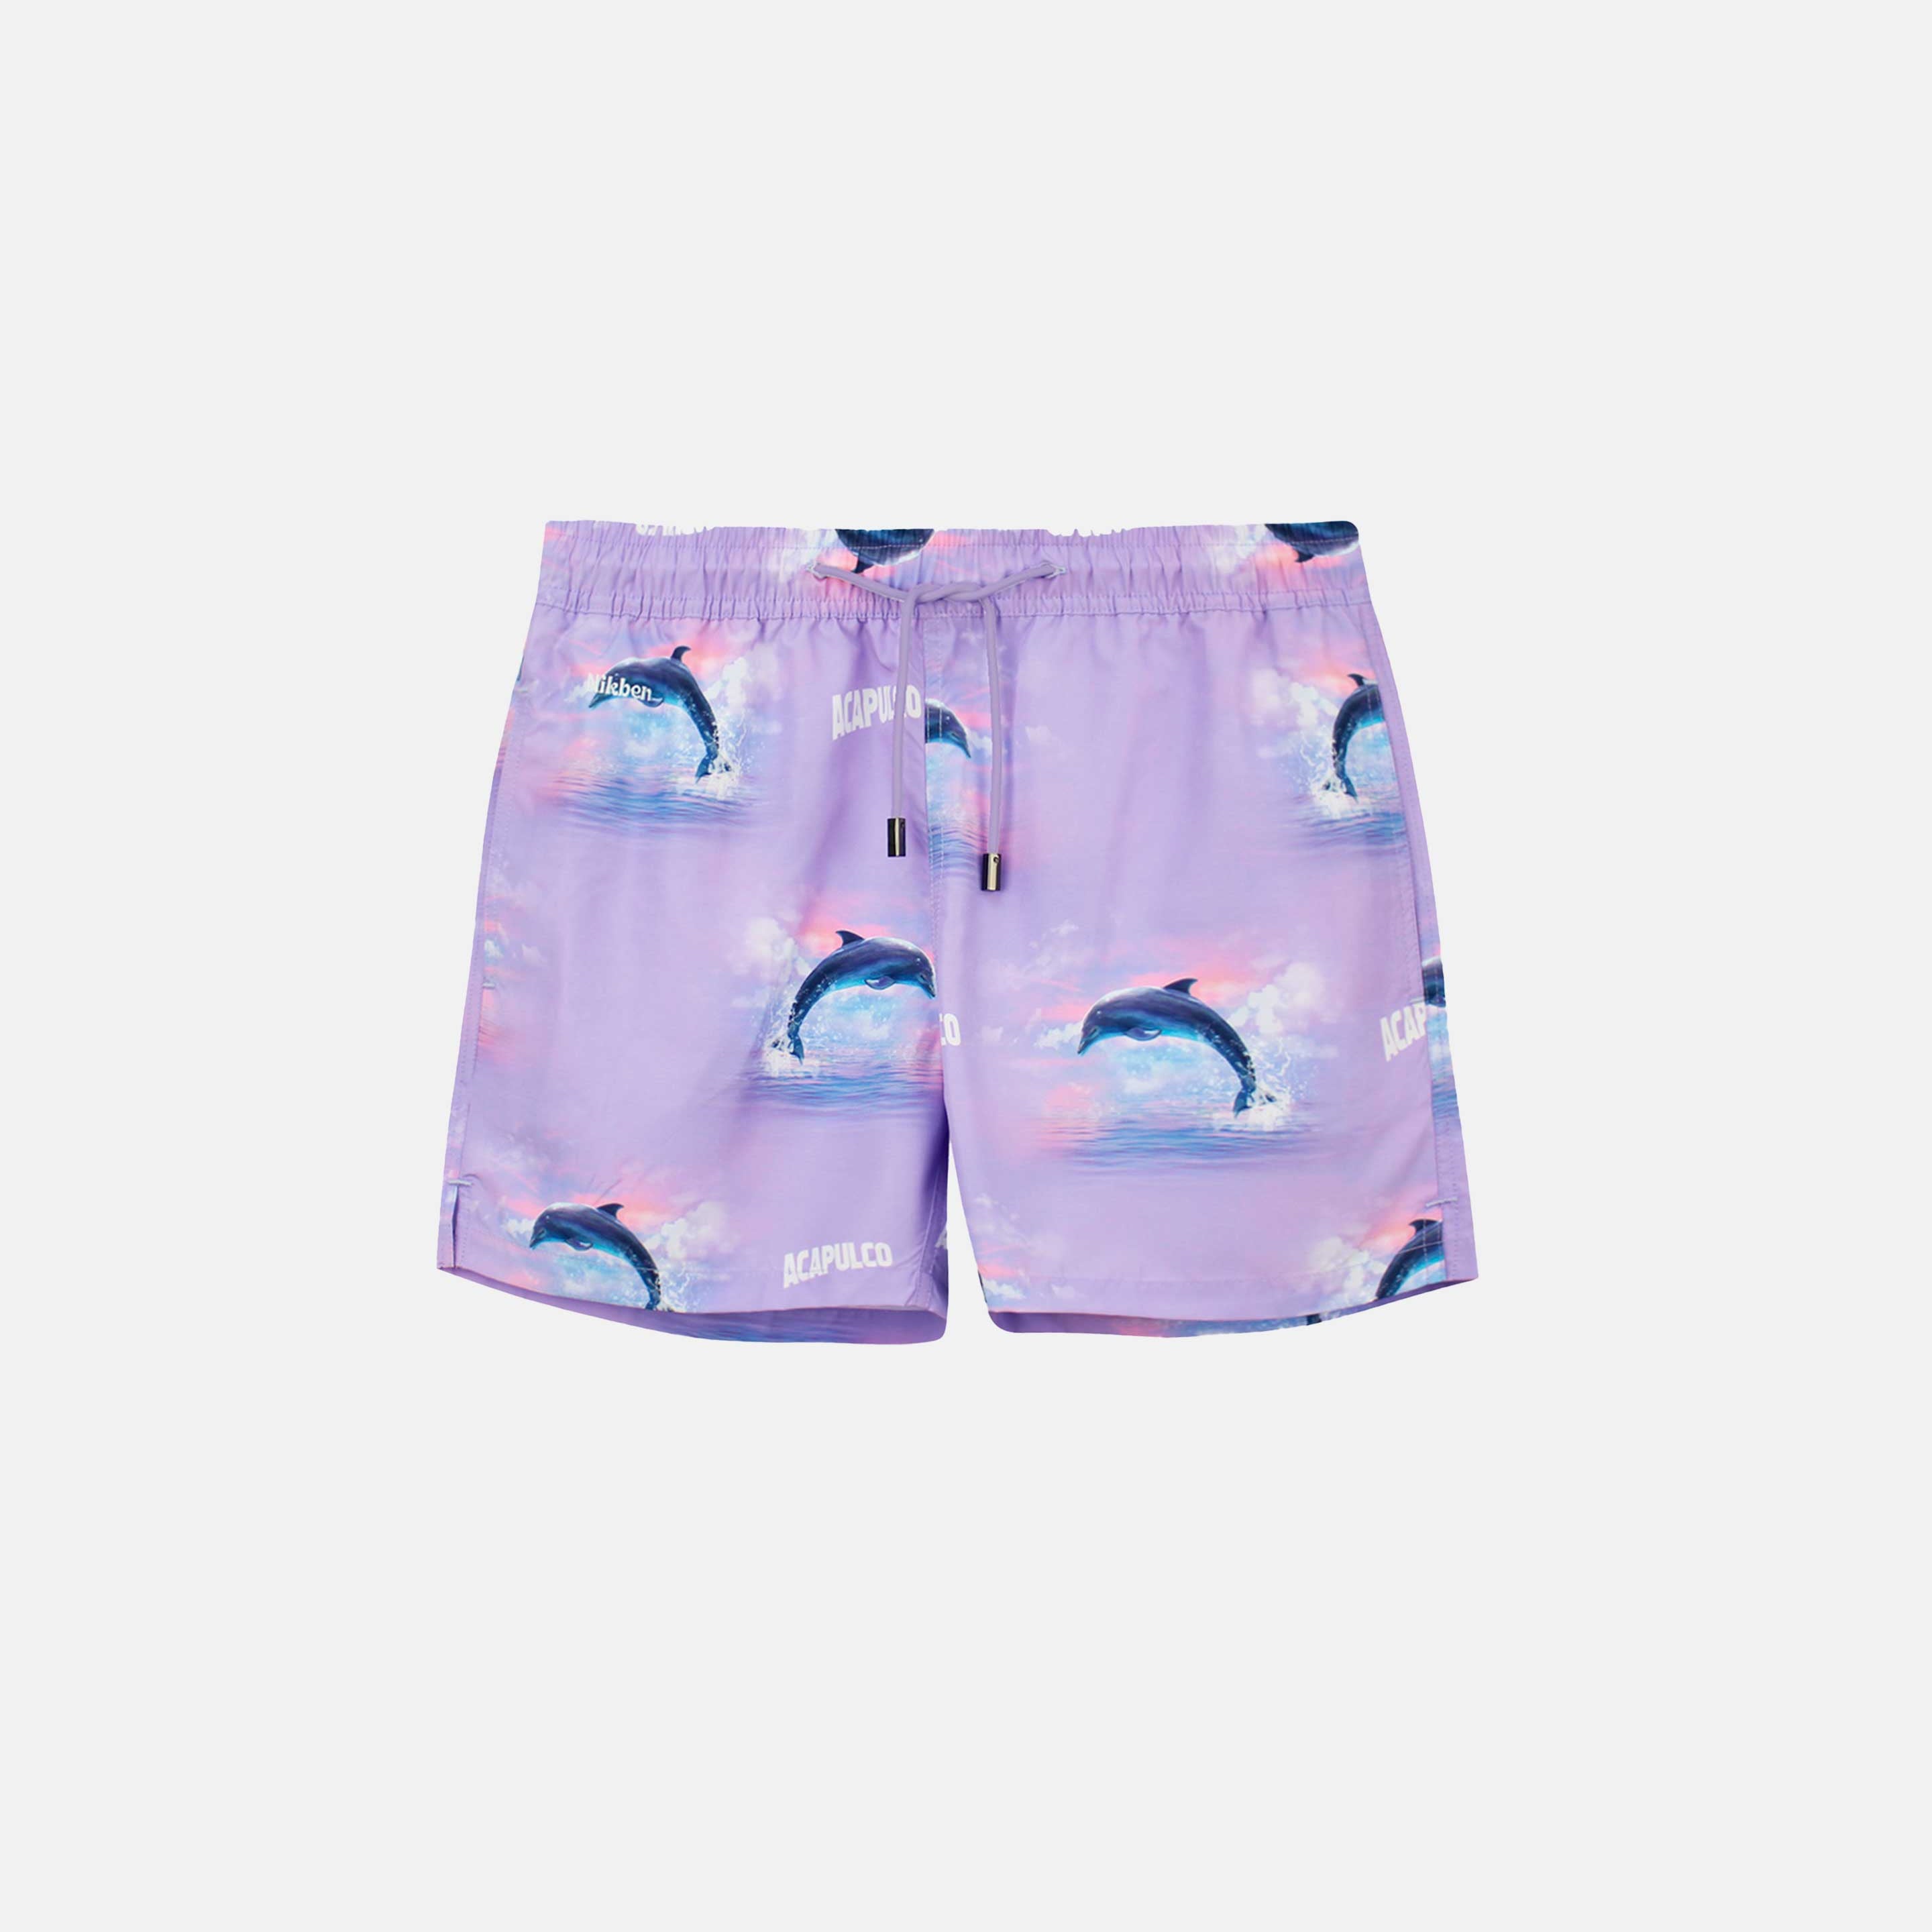 Purple swim trunks with dolphin print. Mid length shorts with drawstring waistband and two side pockets.